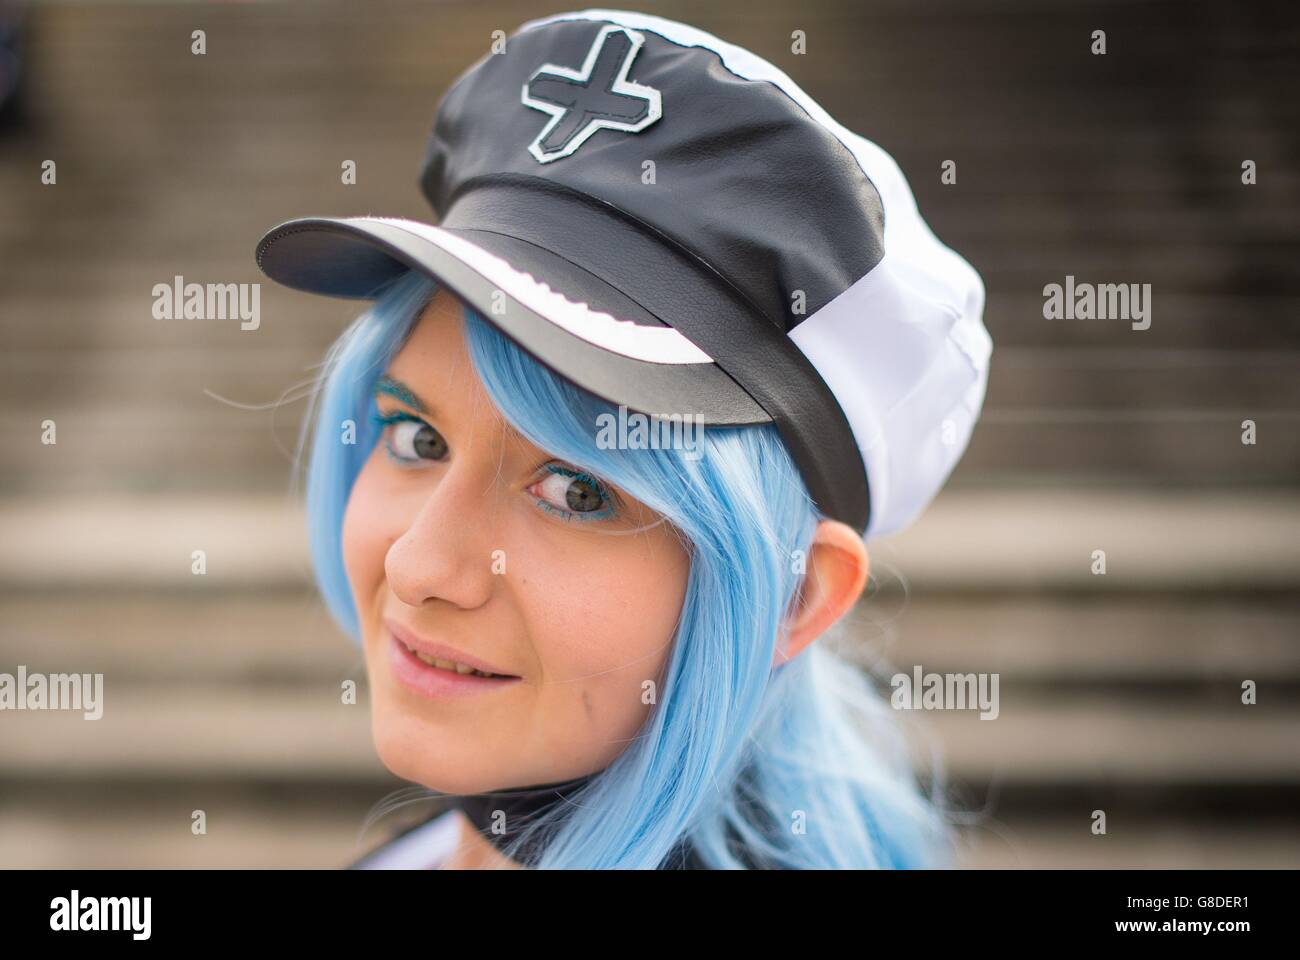 MCM London Comic Con. Molly Flounders dressed as Esdeath, from Akame Ga Kill at the MCM London Comic Con at ExCeL London. Stock Photo